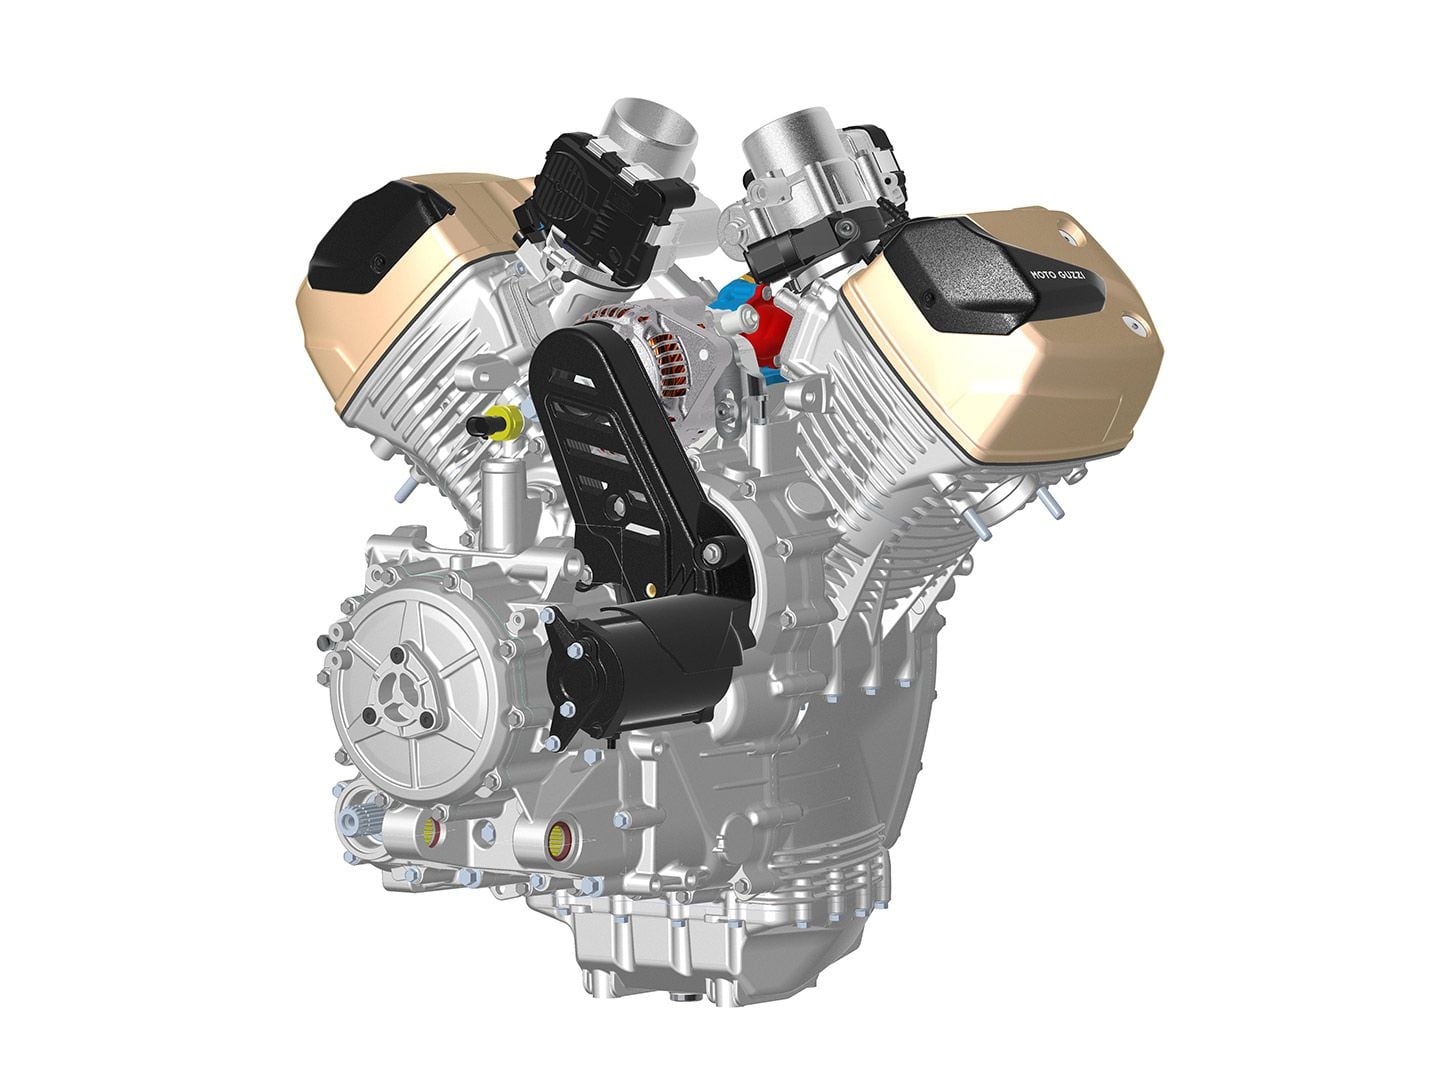 The V100’s alternator is driven by a counter-rotating shaft that cancels some of the roll reaction that is inherent in a longitudinal-crank V-twin.